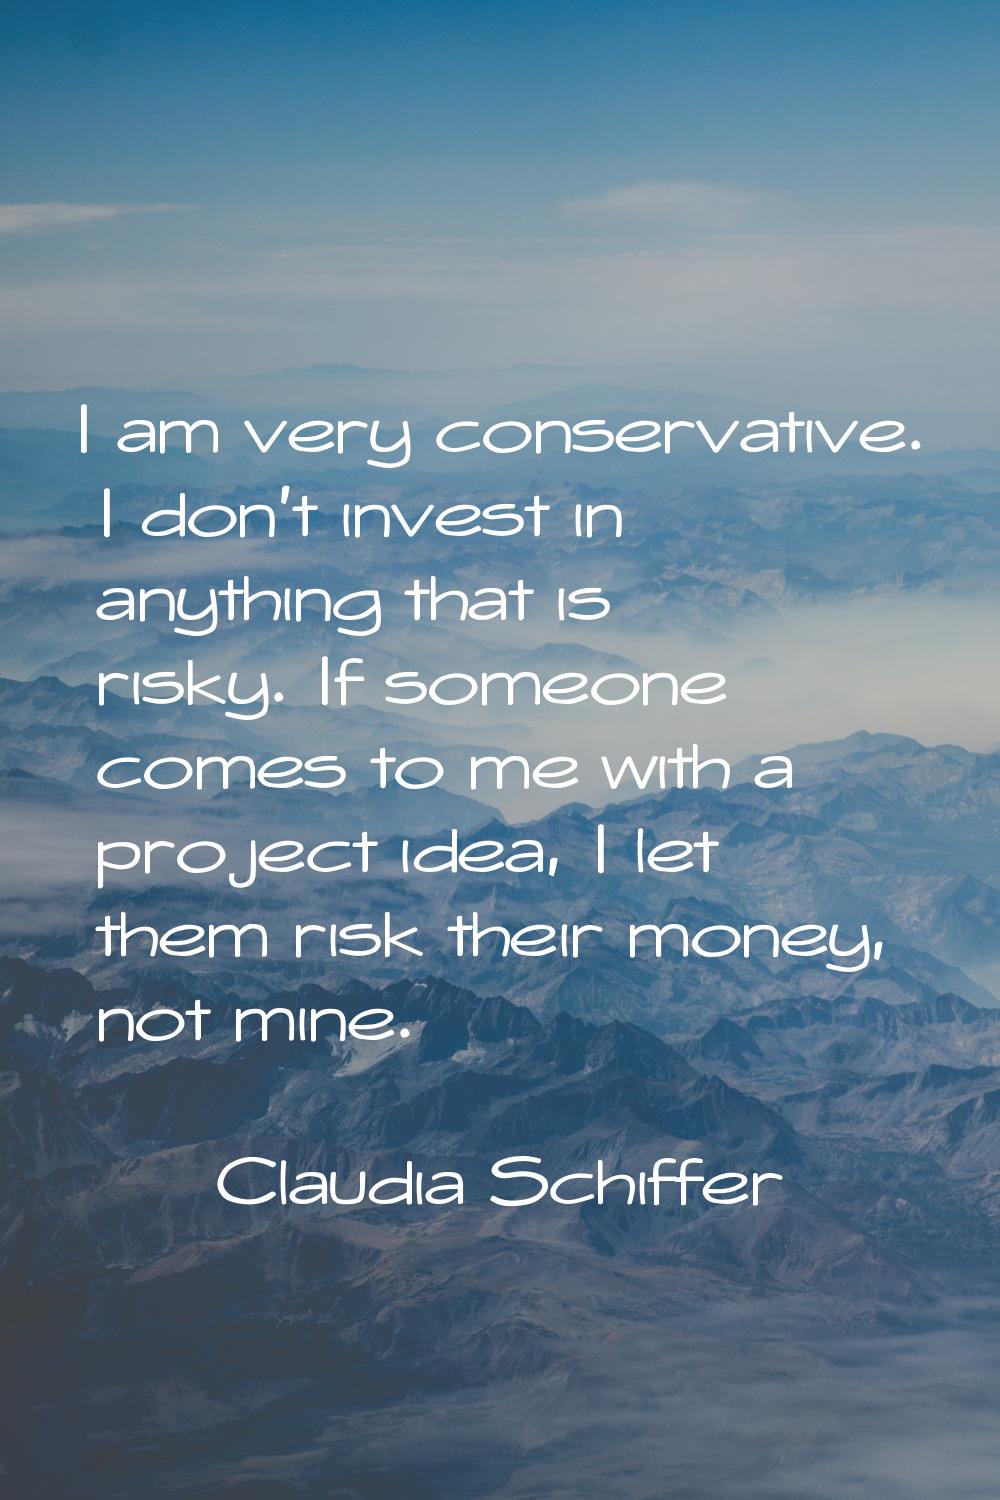 I am very conservative. I don't invest in anything that is risky. If someone comes to me with a pro